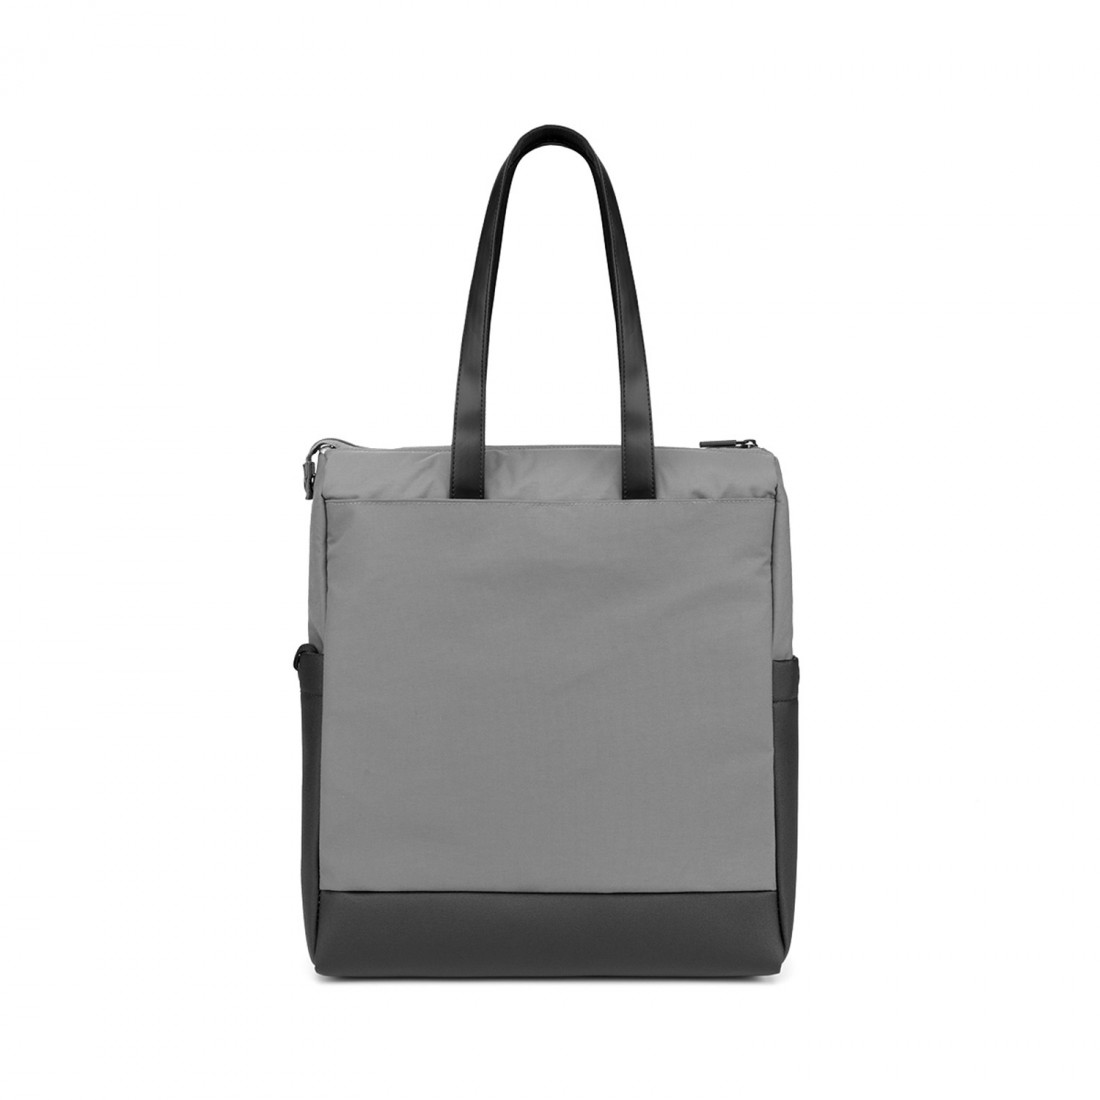 ID TOTE BAG GREY/BLACK FOR DIGITAL DEVICES UP TO 13 MOLESKINE